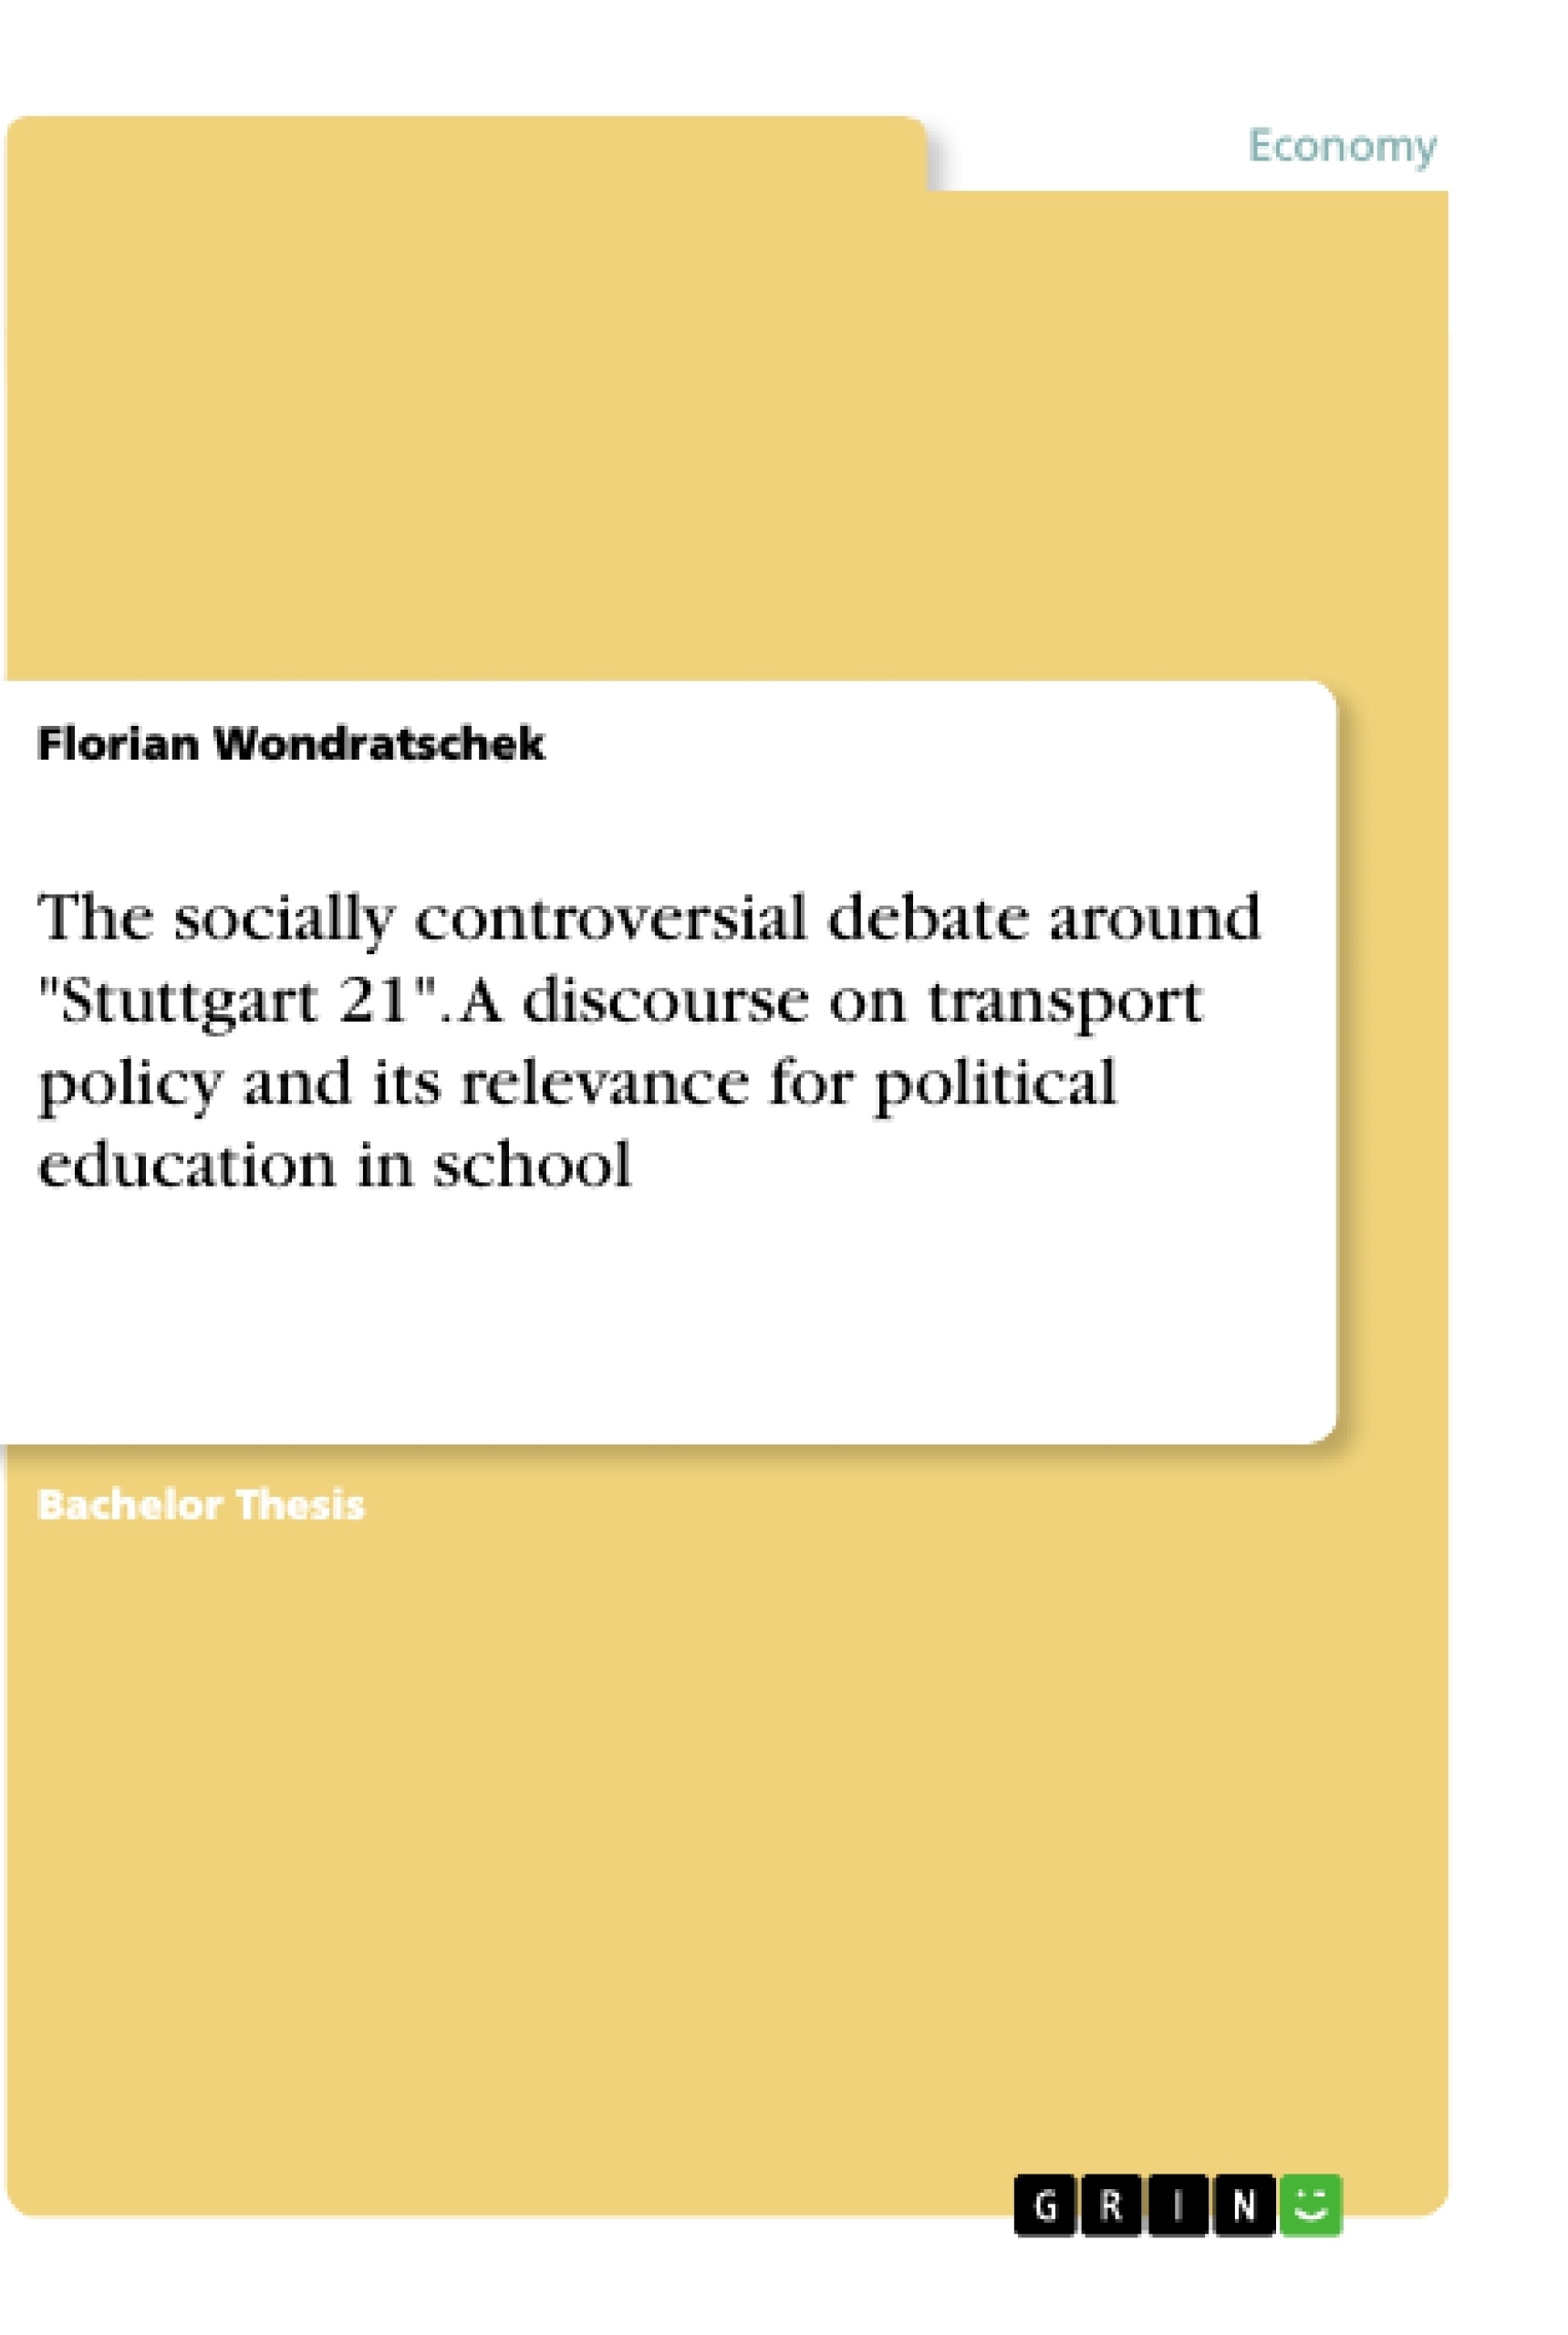 Title: The socially controversial debate around "Stuttgart 21". A discourse on transport policy and its relevance for political education in school